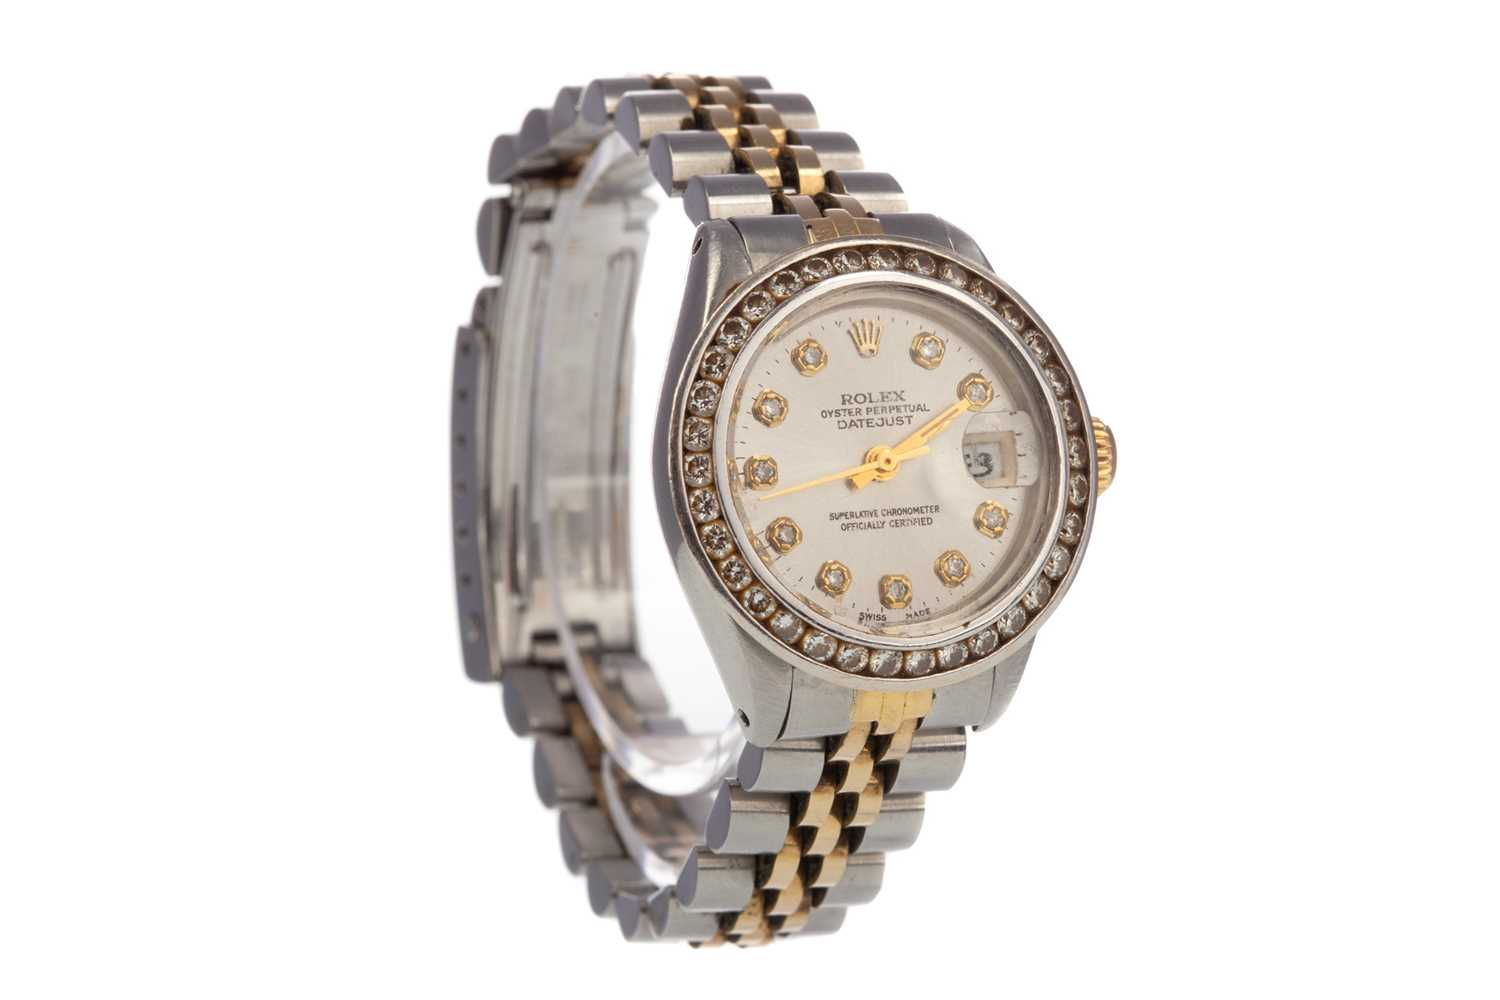 Lot 726 - A LADY'S ROLEX OYSTER PERPETUAL DATEJUST BI COLOUR AUTOMATIC WRIST WATCH